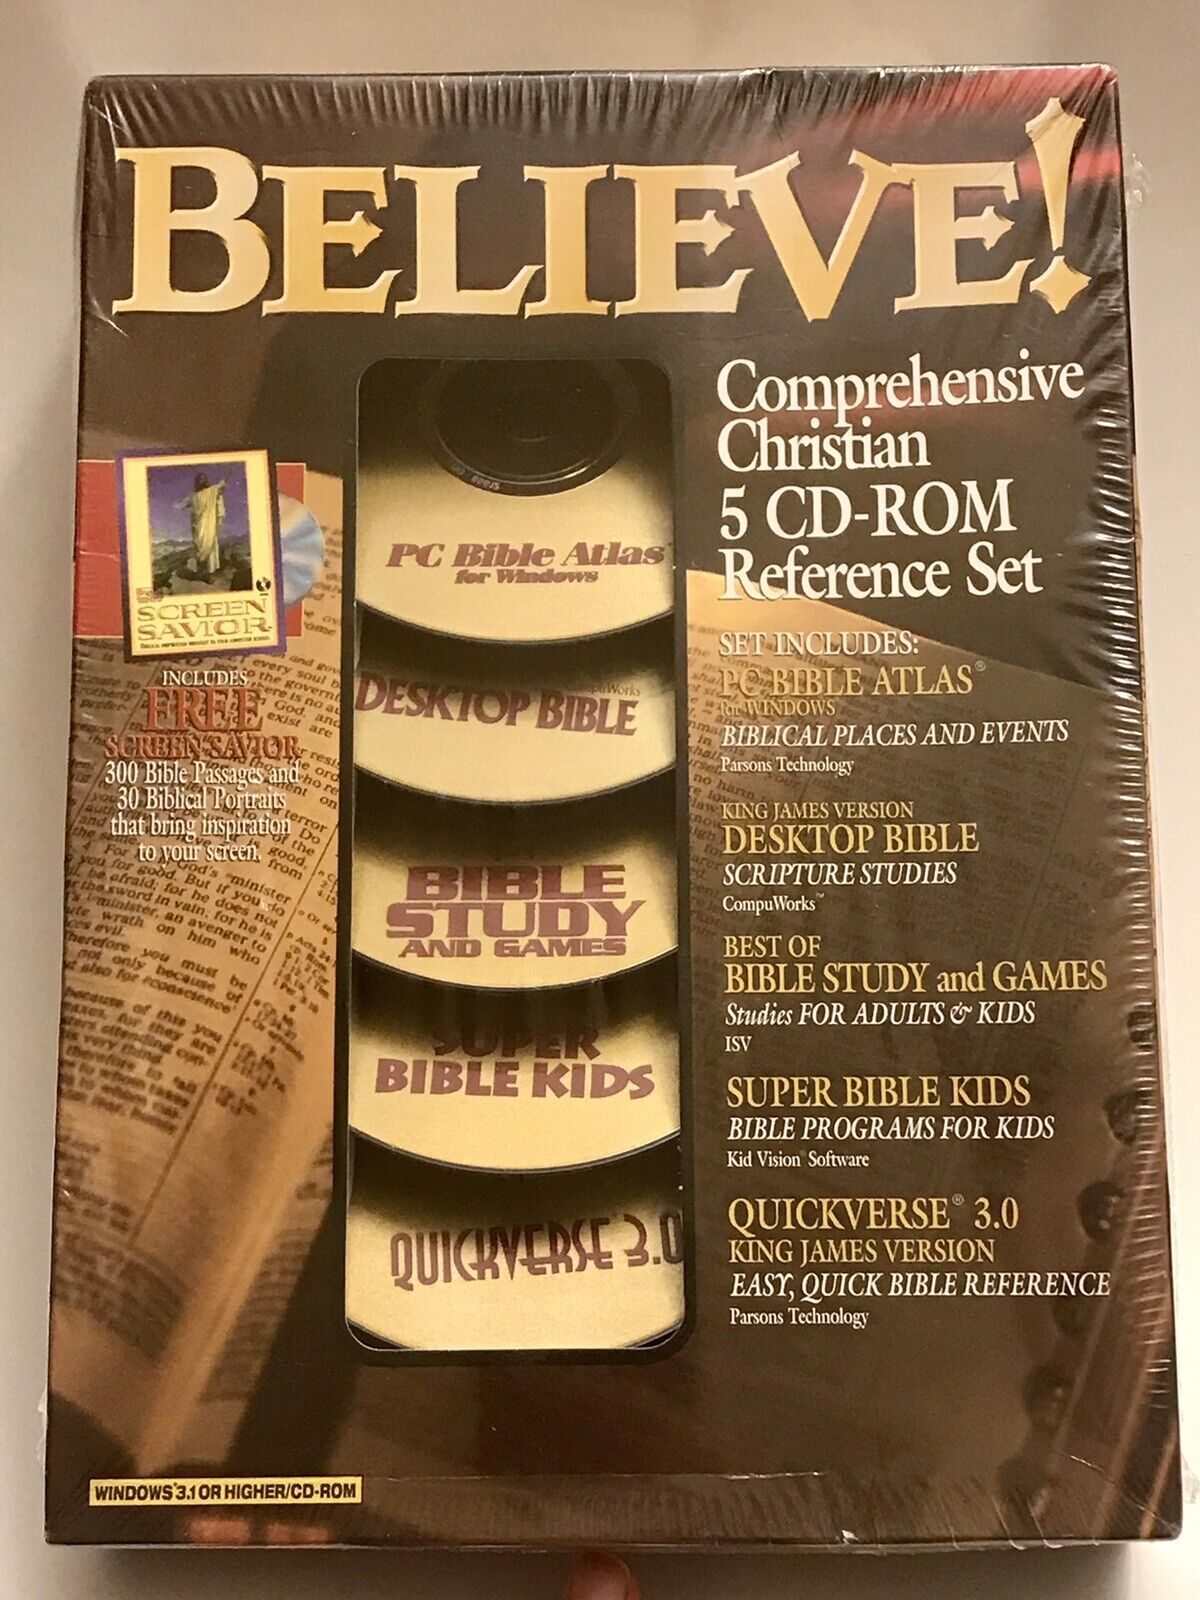 Believe Comprehensive Christian 5 CD-ROM Reference Set 1995 printed in USA